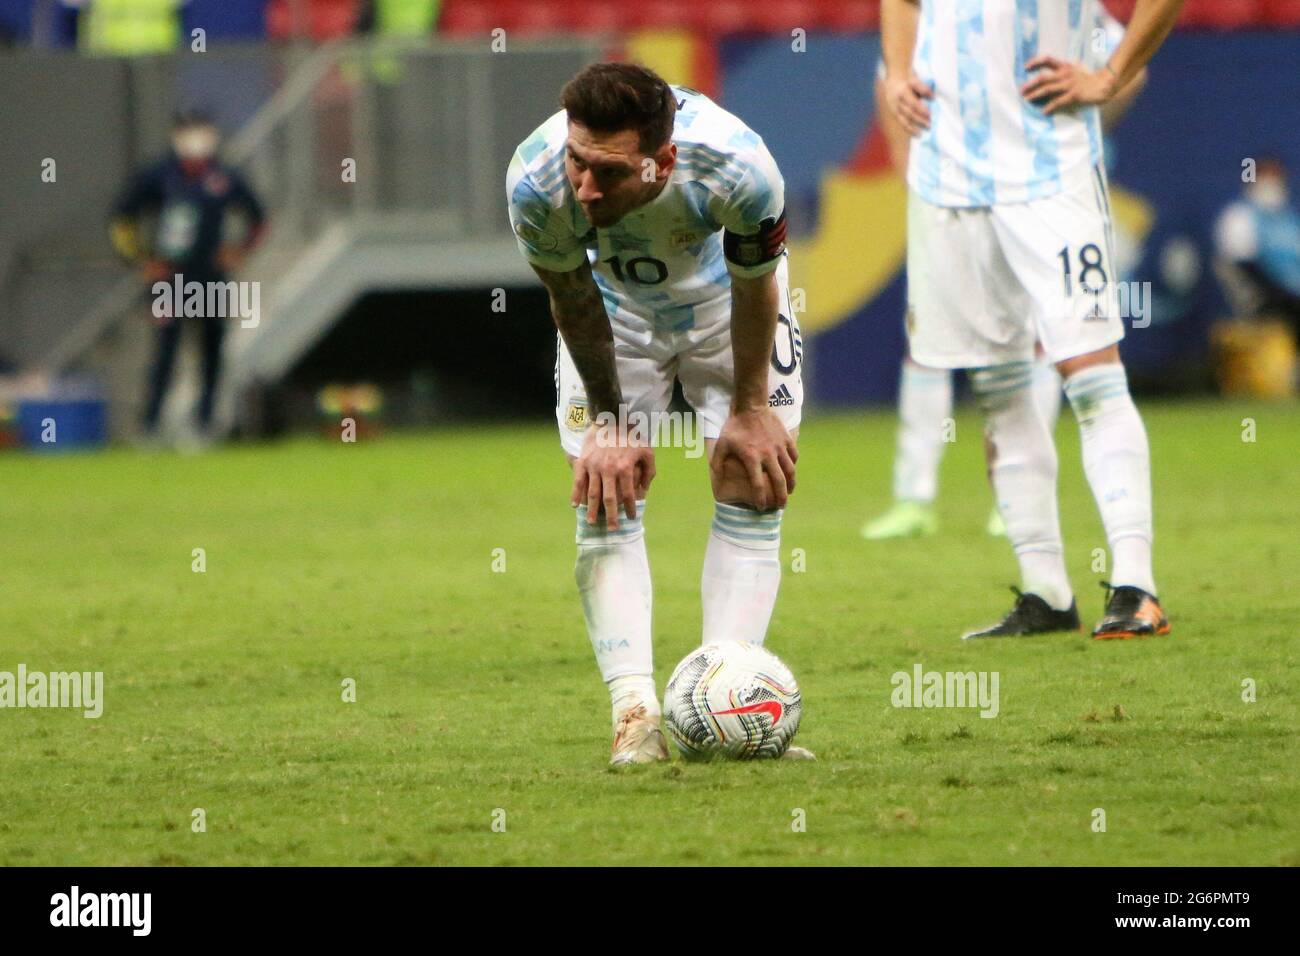 Brasilia, Brazil. 6th July, 2021.Lionel Messi of Argentina during the Copa America 2021, semi-final football match between Argentina and Colombia on July 6, 2021 at Estádio Nacional Mané Garrincha in Brasilia, Brazil. Photo by Laurent Lairys/ABACAPRESS.COM Stock Photo